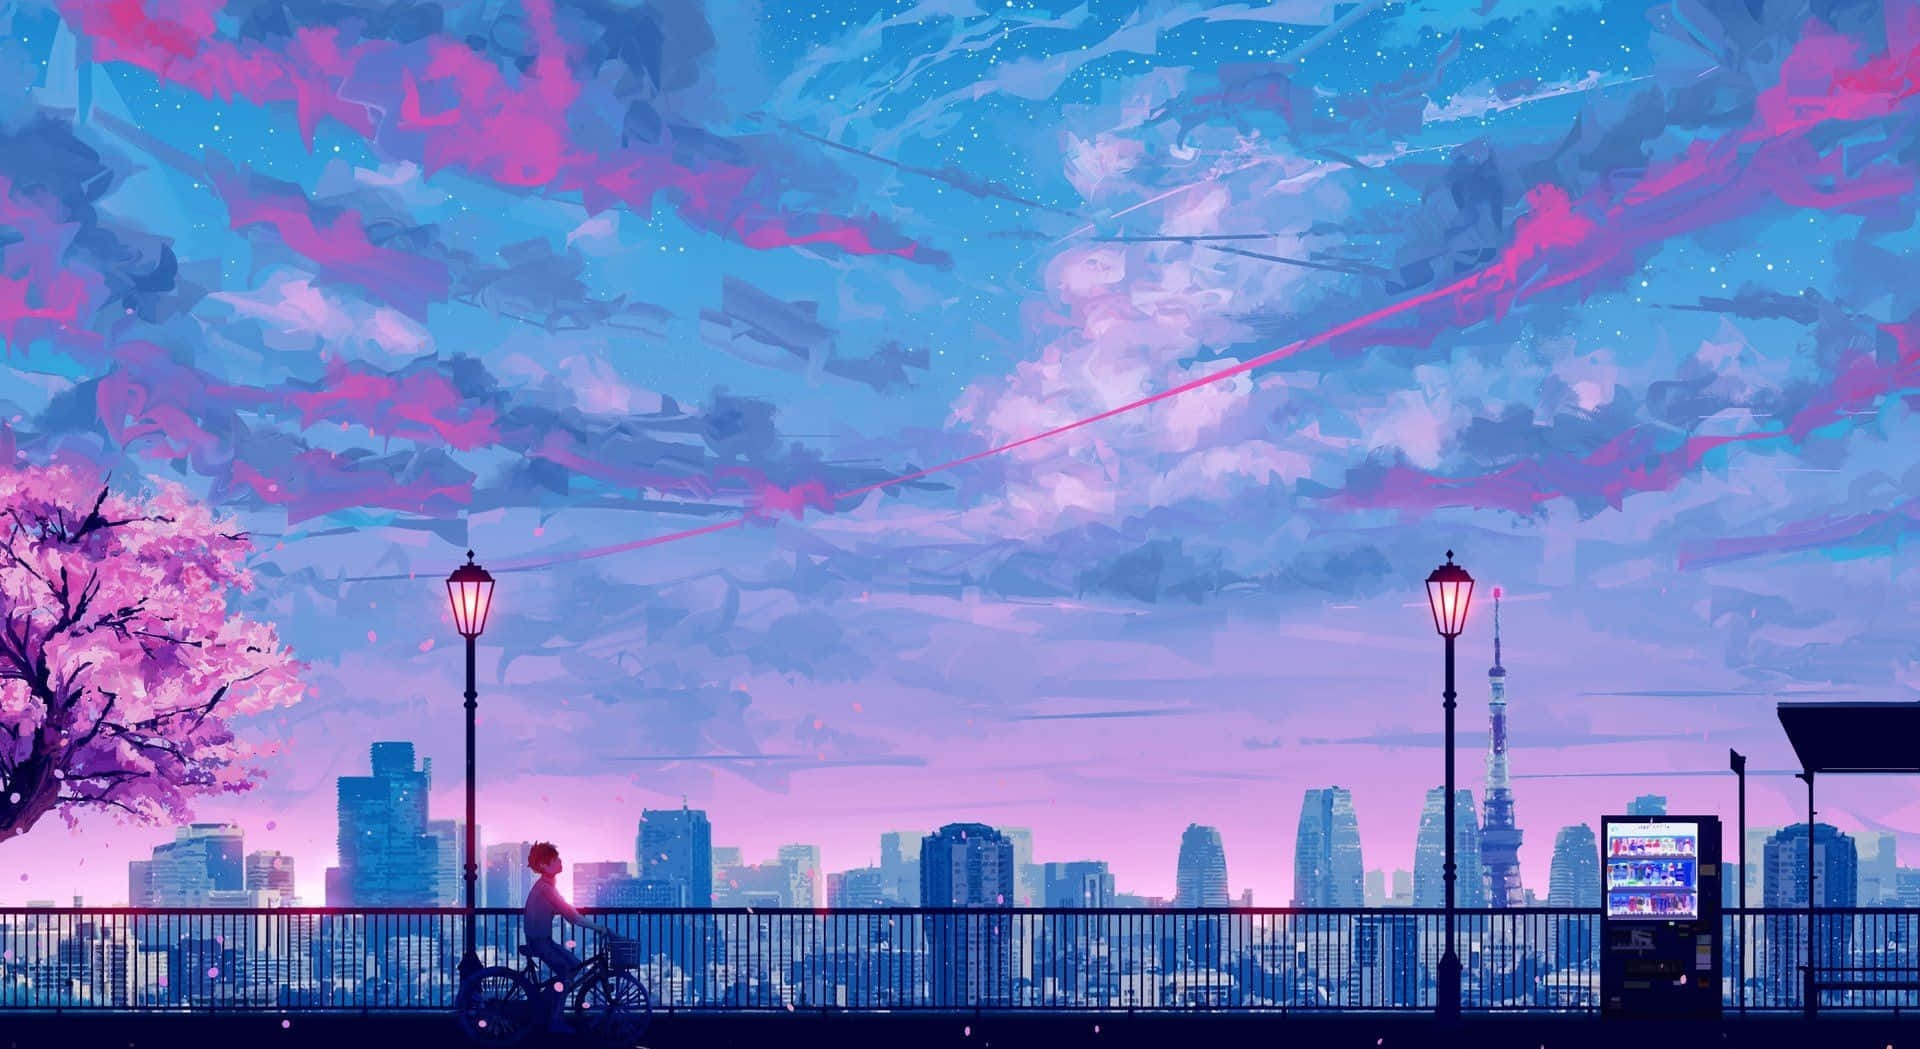 A Painting Of A City With A Sky Full Of Pink And Purple Wallpaper